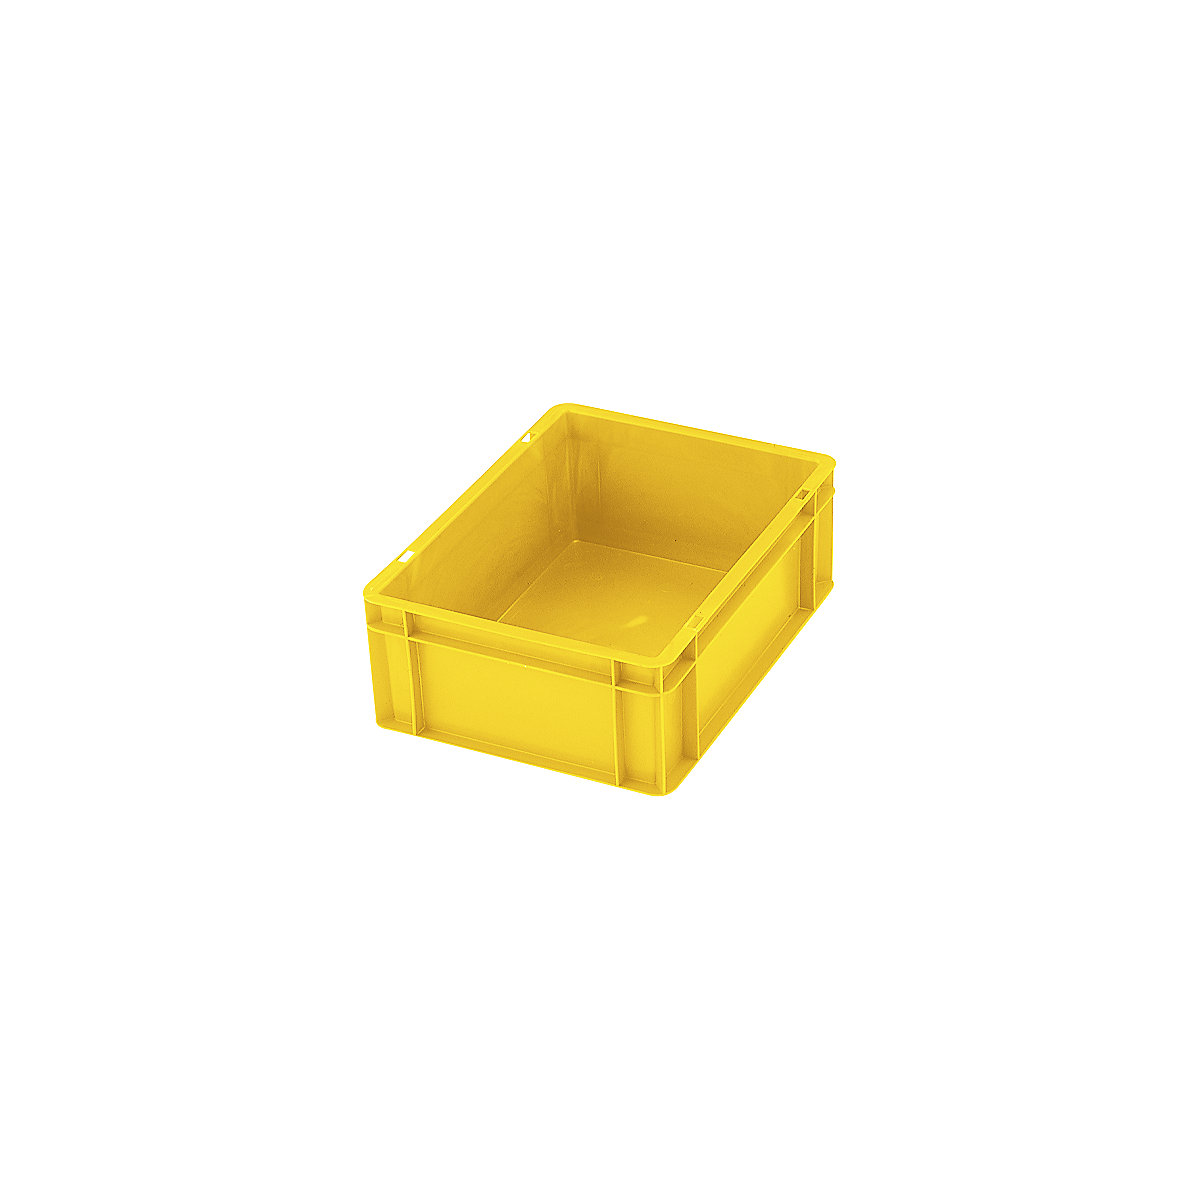 Euro stacking container, closed walls and base, LxWxH 600 x 400 x 75 mm, yellow, pack of 5-5